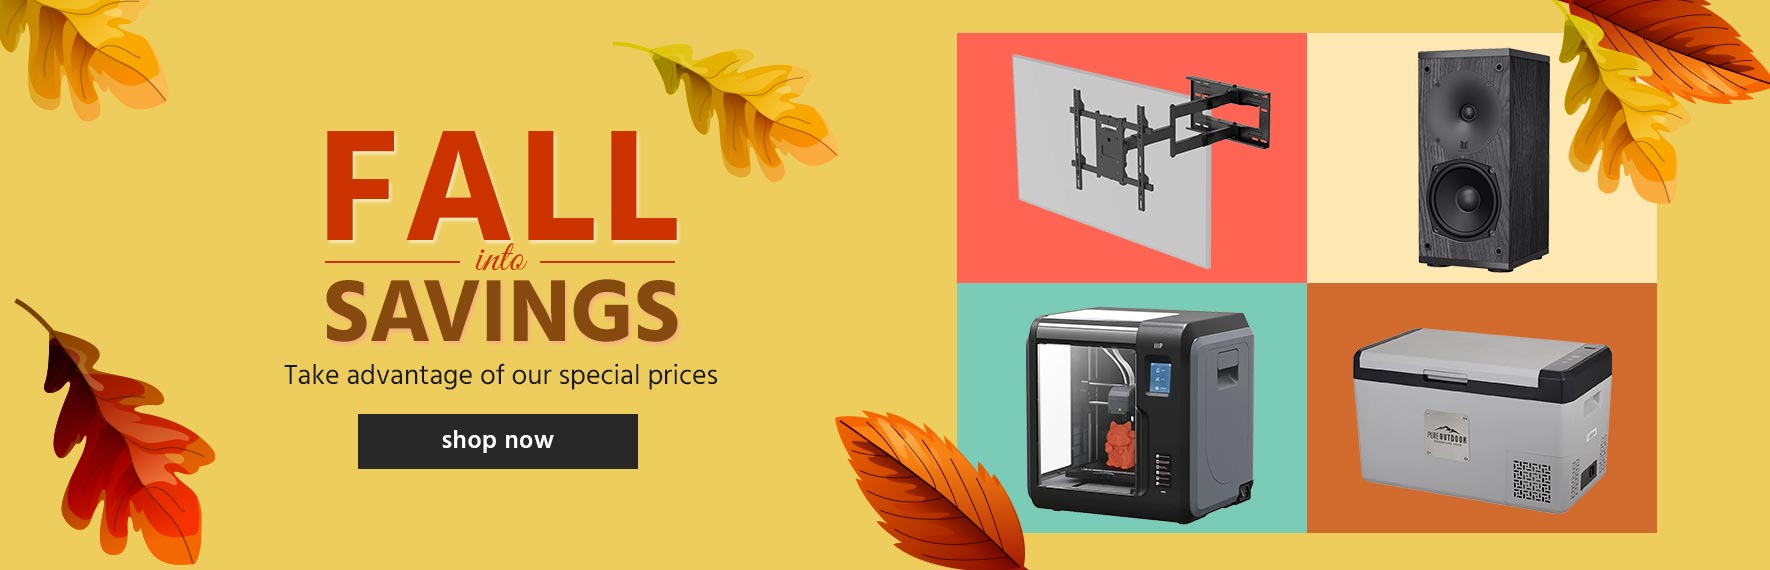 Fall Into Savings!  Take advantage of our special prices Shop Now